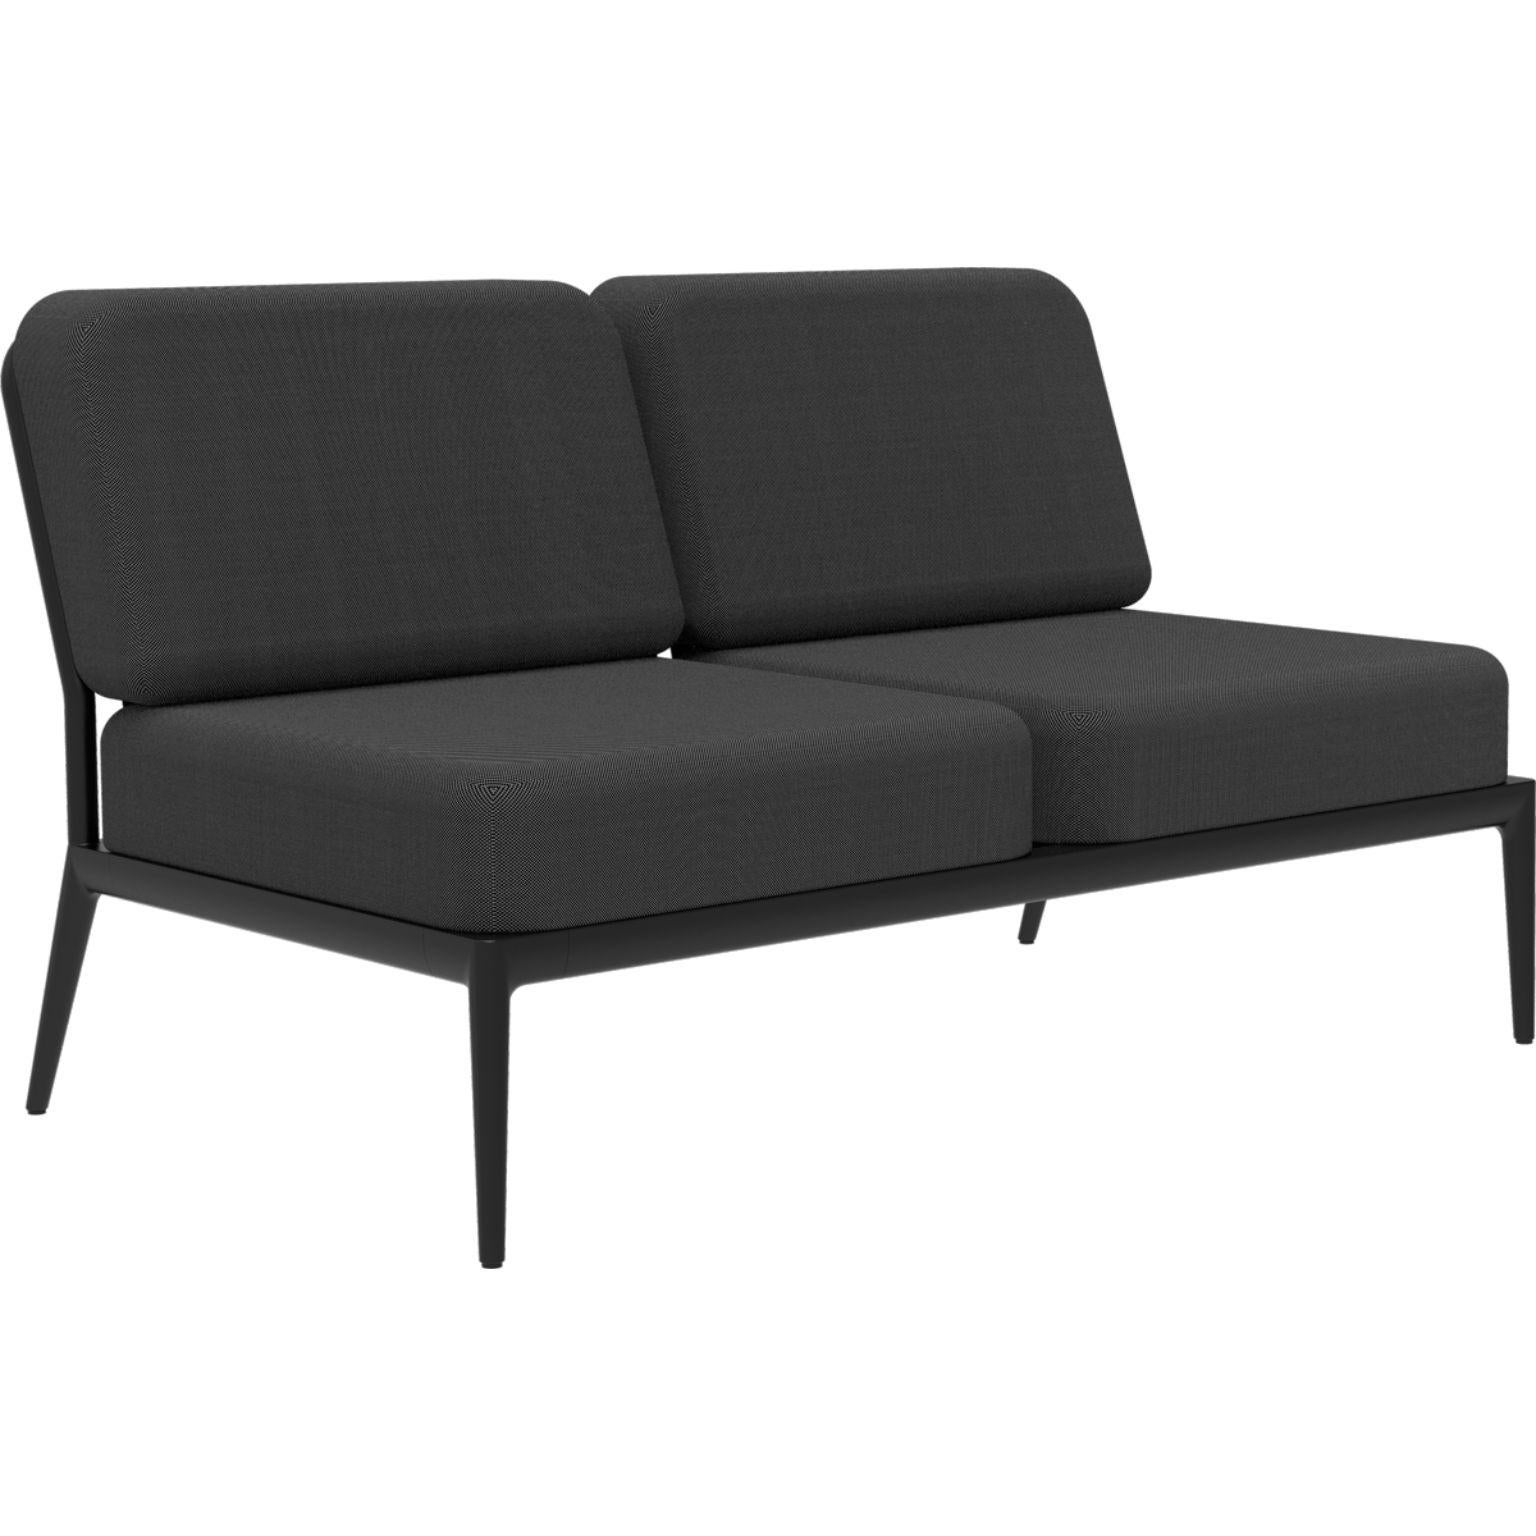 Ribbons Black Double central modular sofa by MOWEE
Dimensions: D83 x W136 x H81 cm
Material: Aluminum, and upholstery.
Weight: 27 kg.
Also available in different colors and finishes. 

An unmistakable collection for its beauty and robustness.